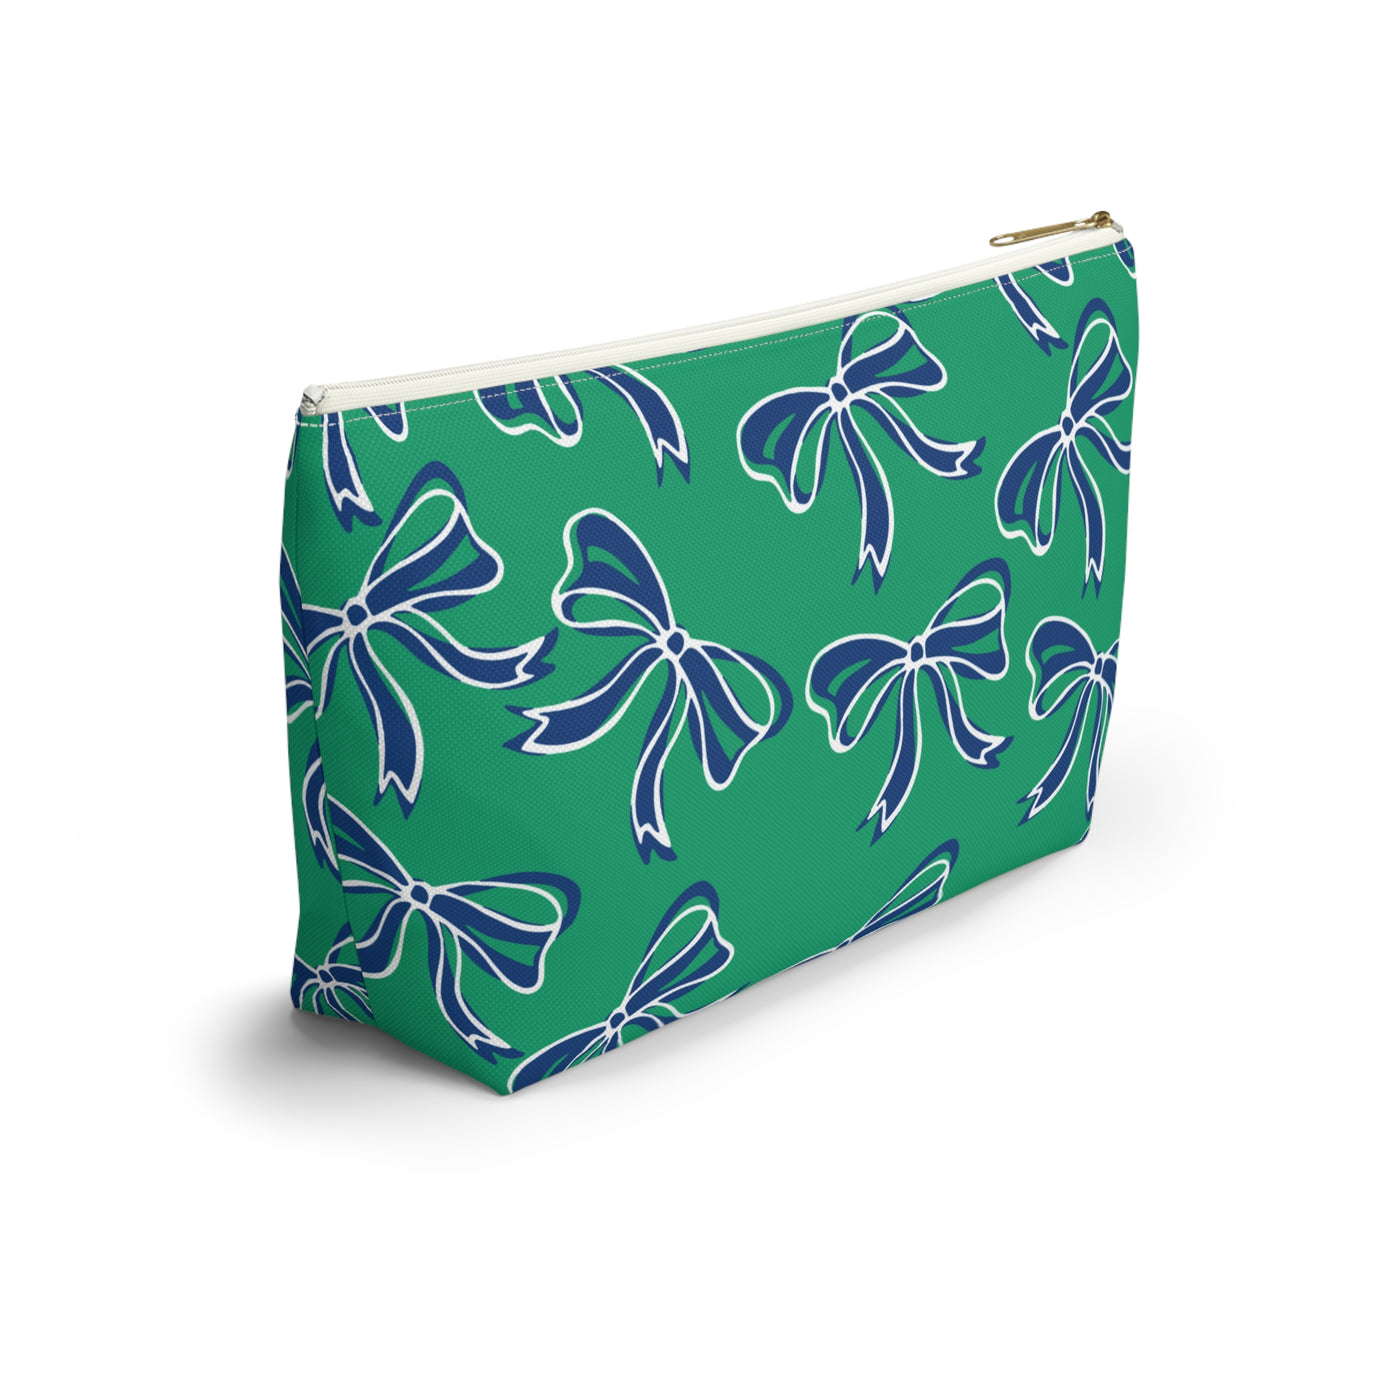 Trendy Bow Makeup Bag - Graduation Gift, Bed Party Gift, Acceptance Gift, College Gift, FGCU, Florida Gulf Coast, Blue and Green